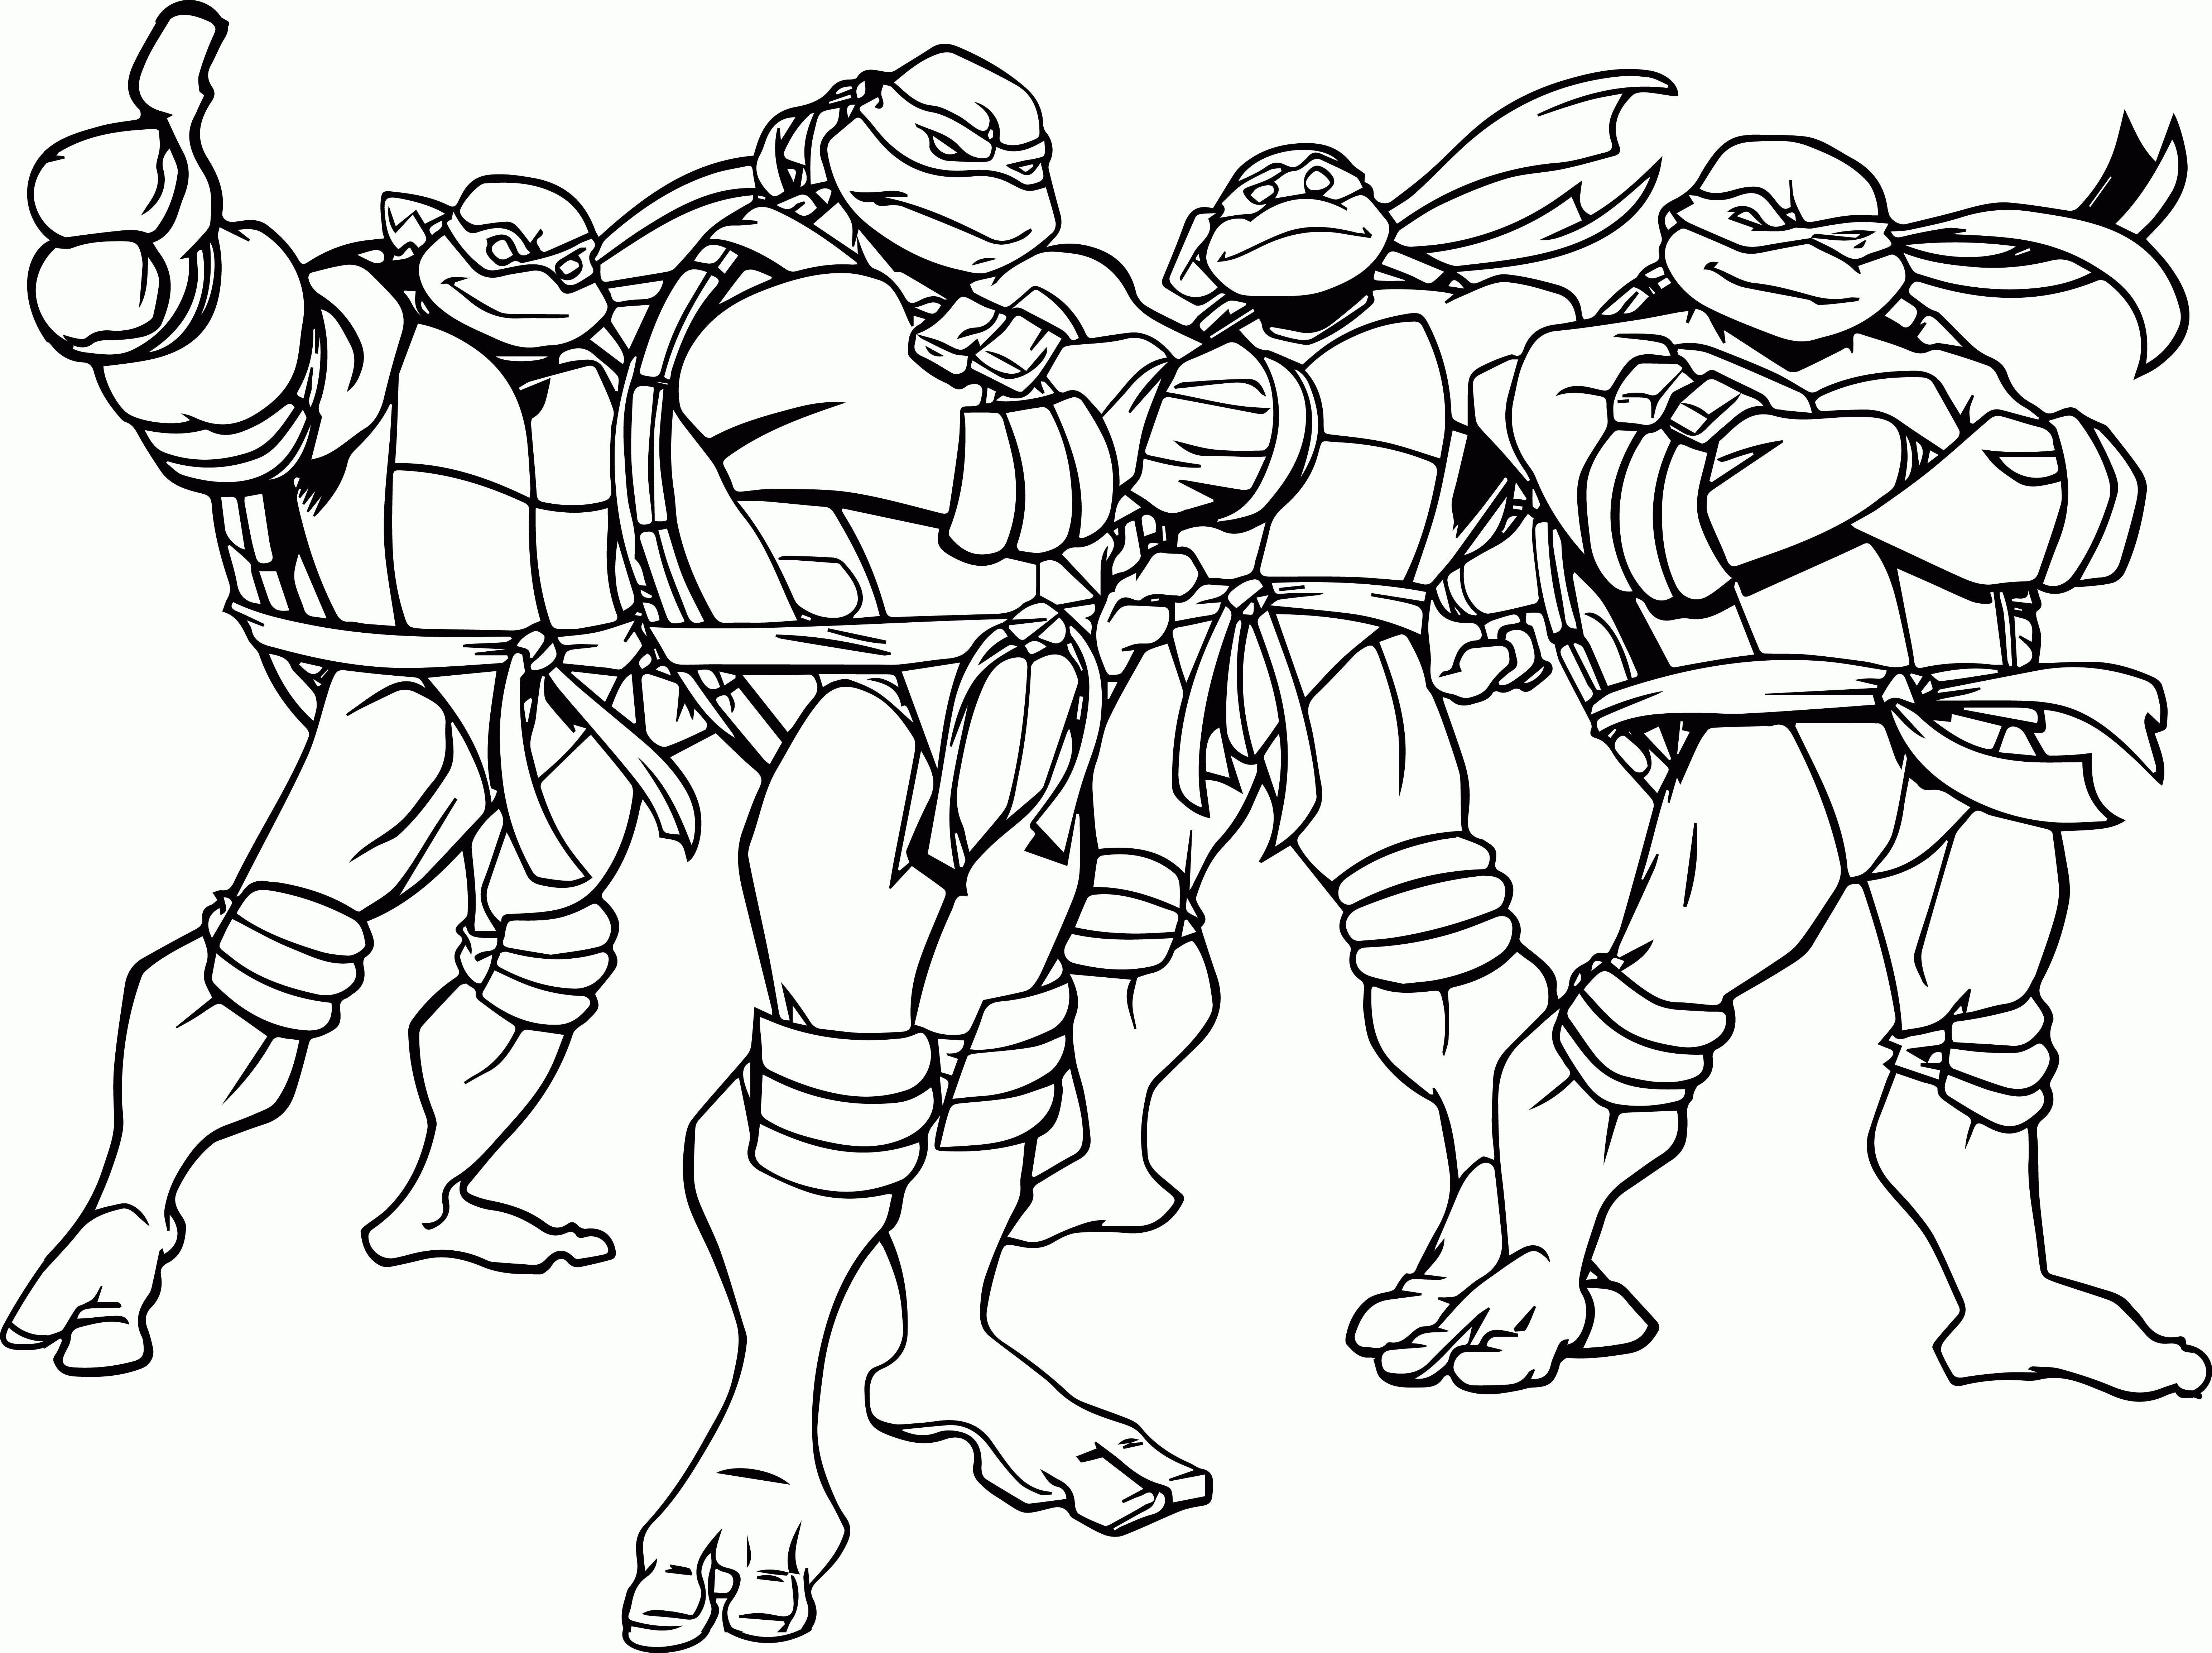 4 Ninja Turtles Coloring Page - Coloring Pages For All ...